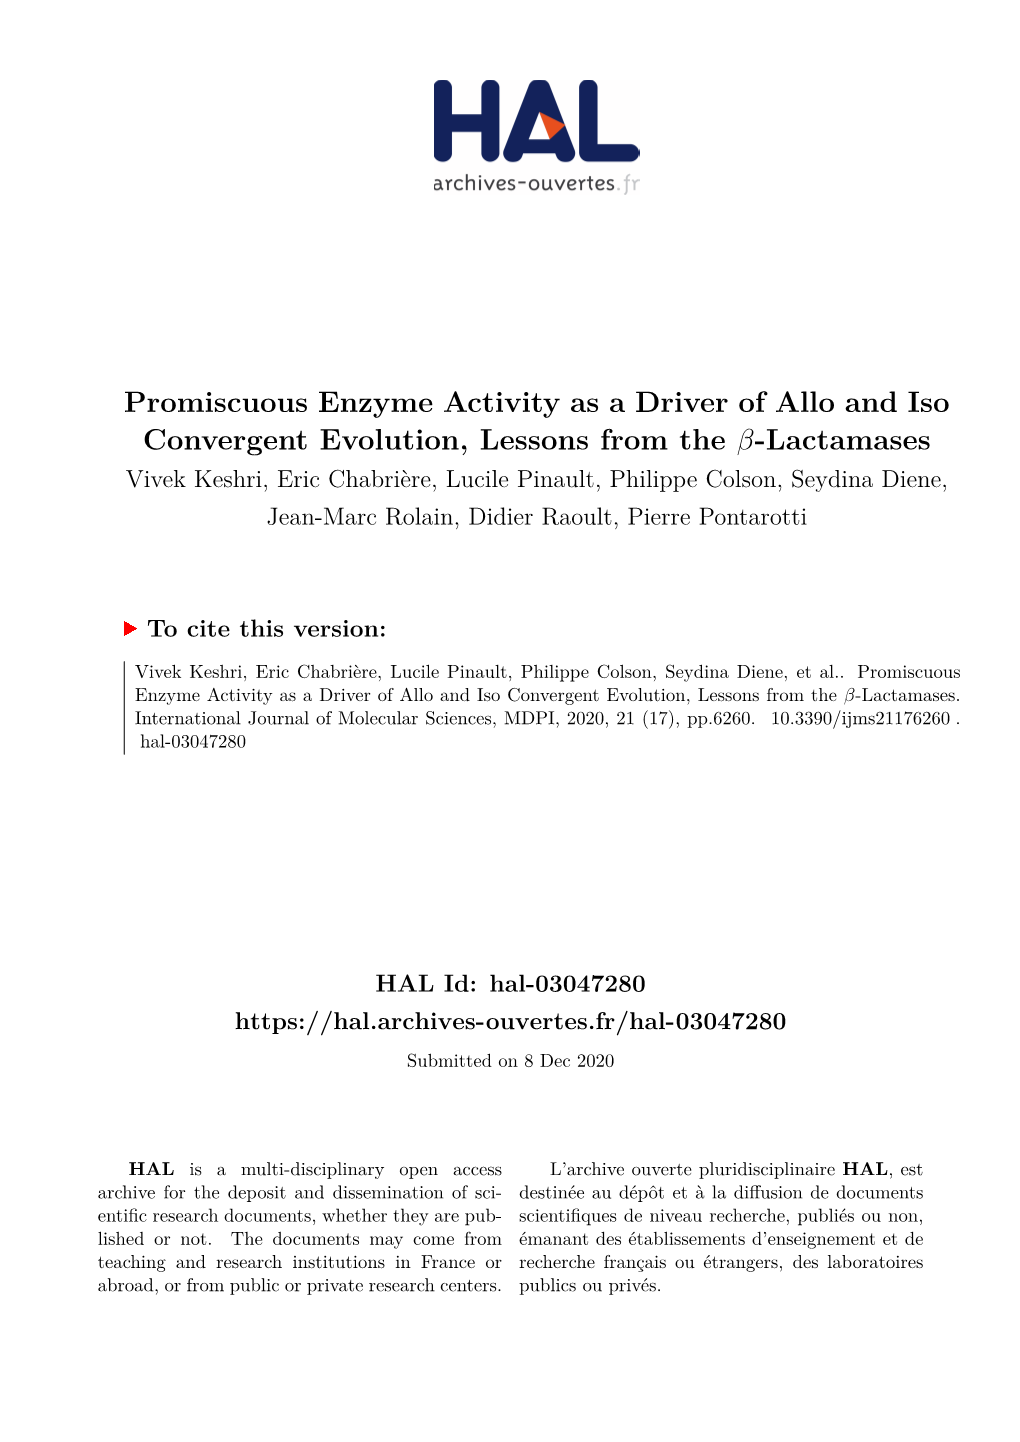 Promiscuous Enzyme Activity As a Driver of Allo and Iso Convergent Evolution, Lessons from the -Lactamases